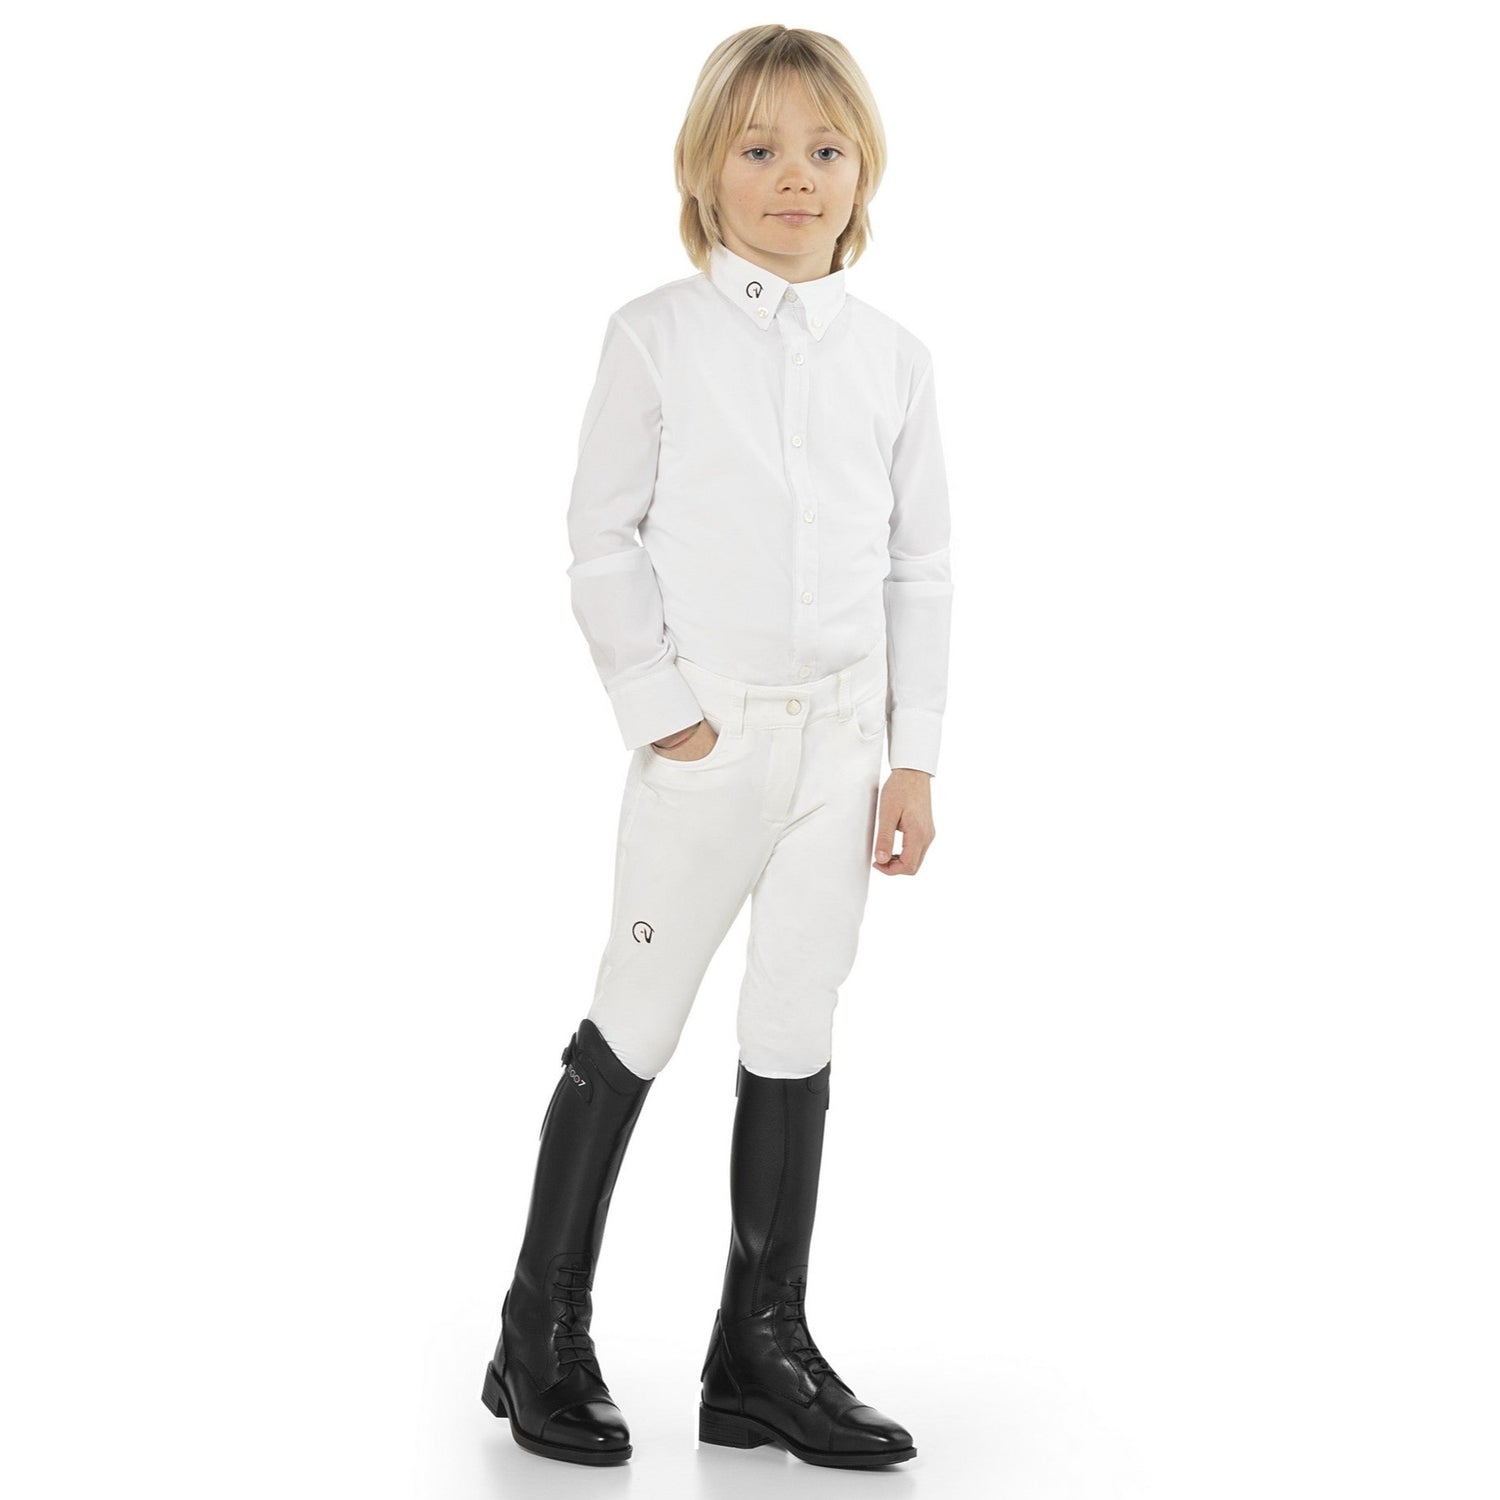 Ego7 EJ Jumping breeches for kids